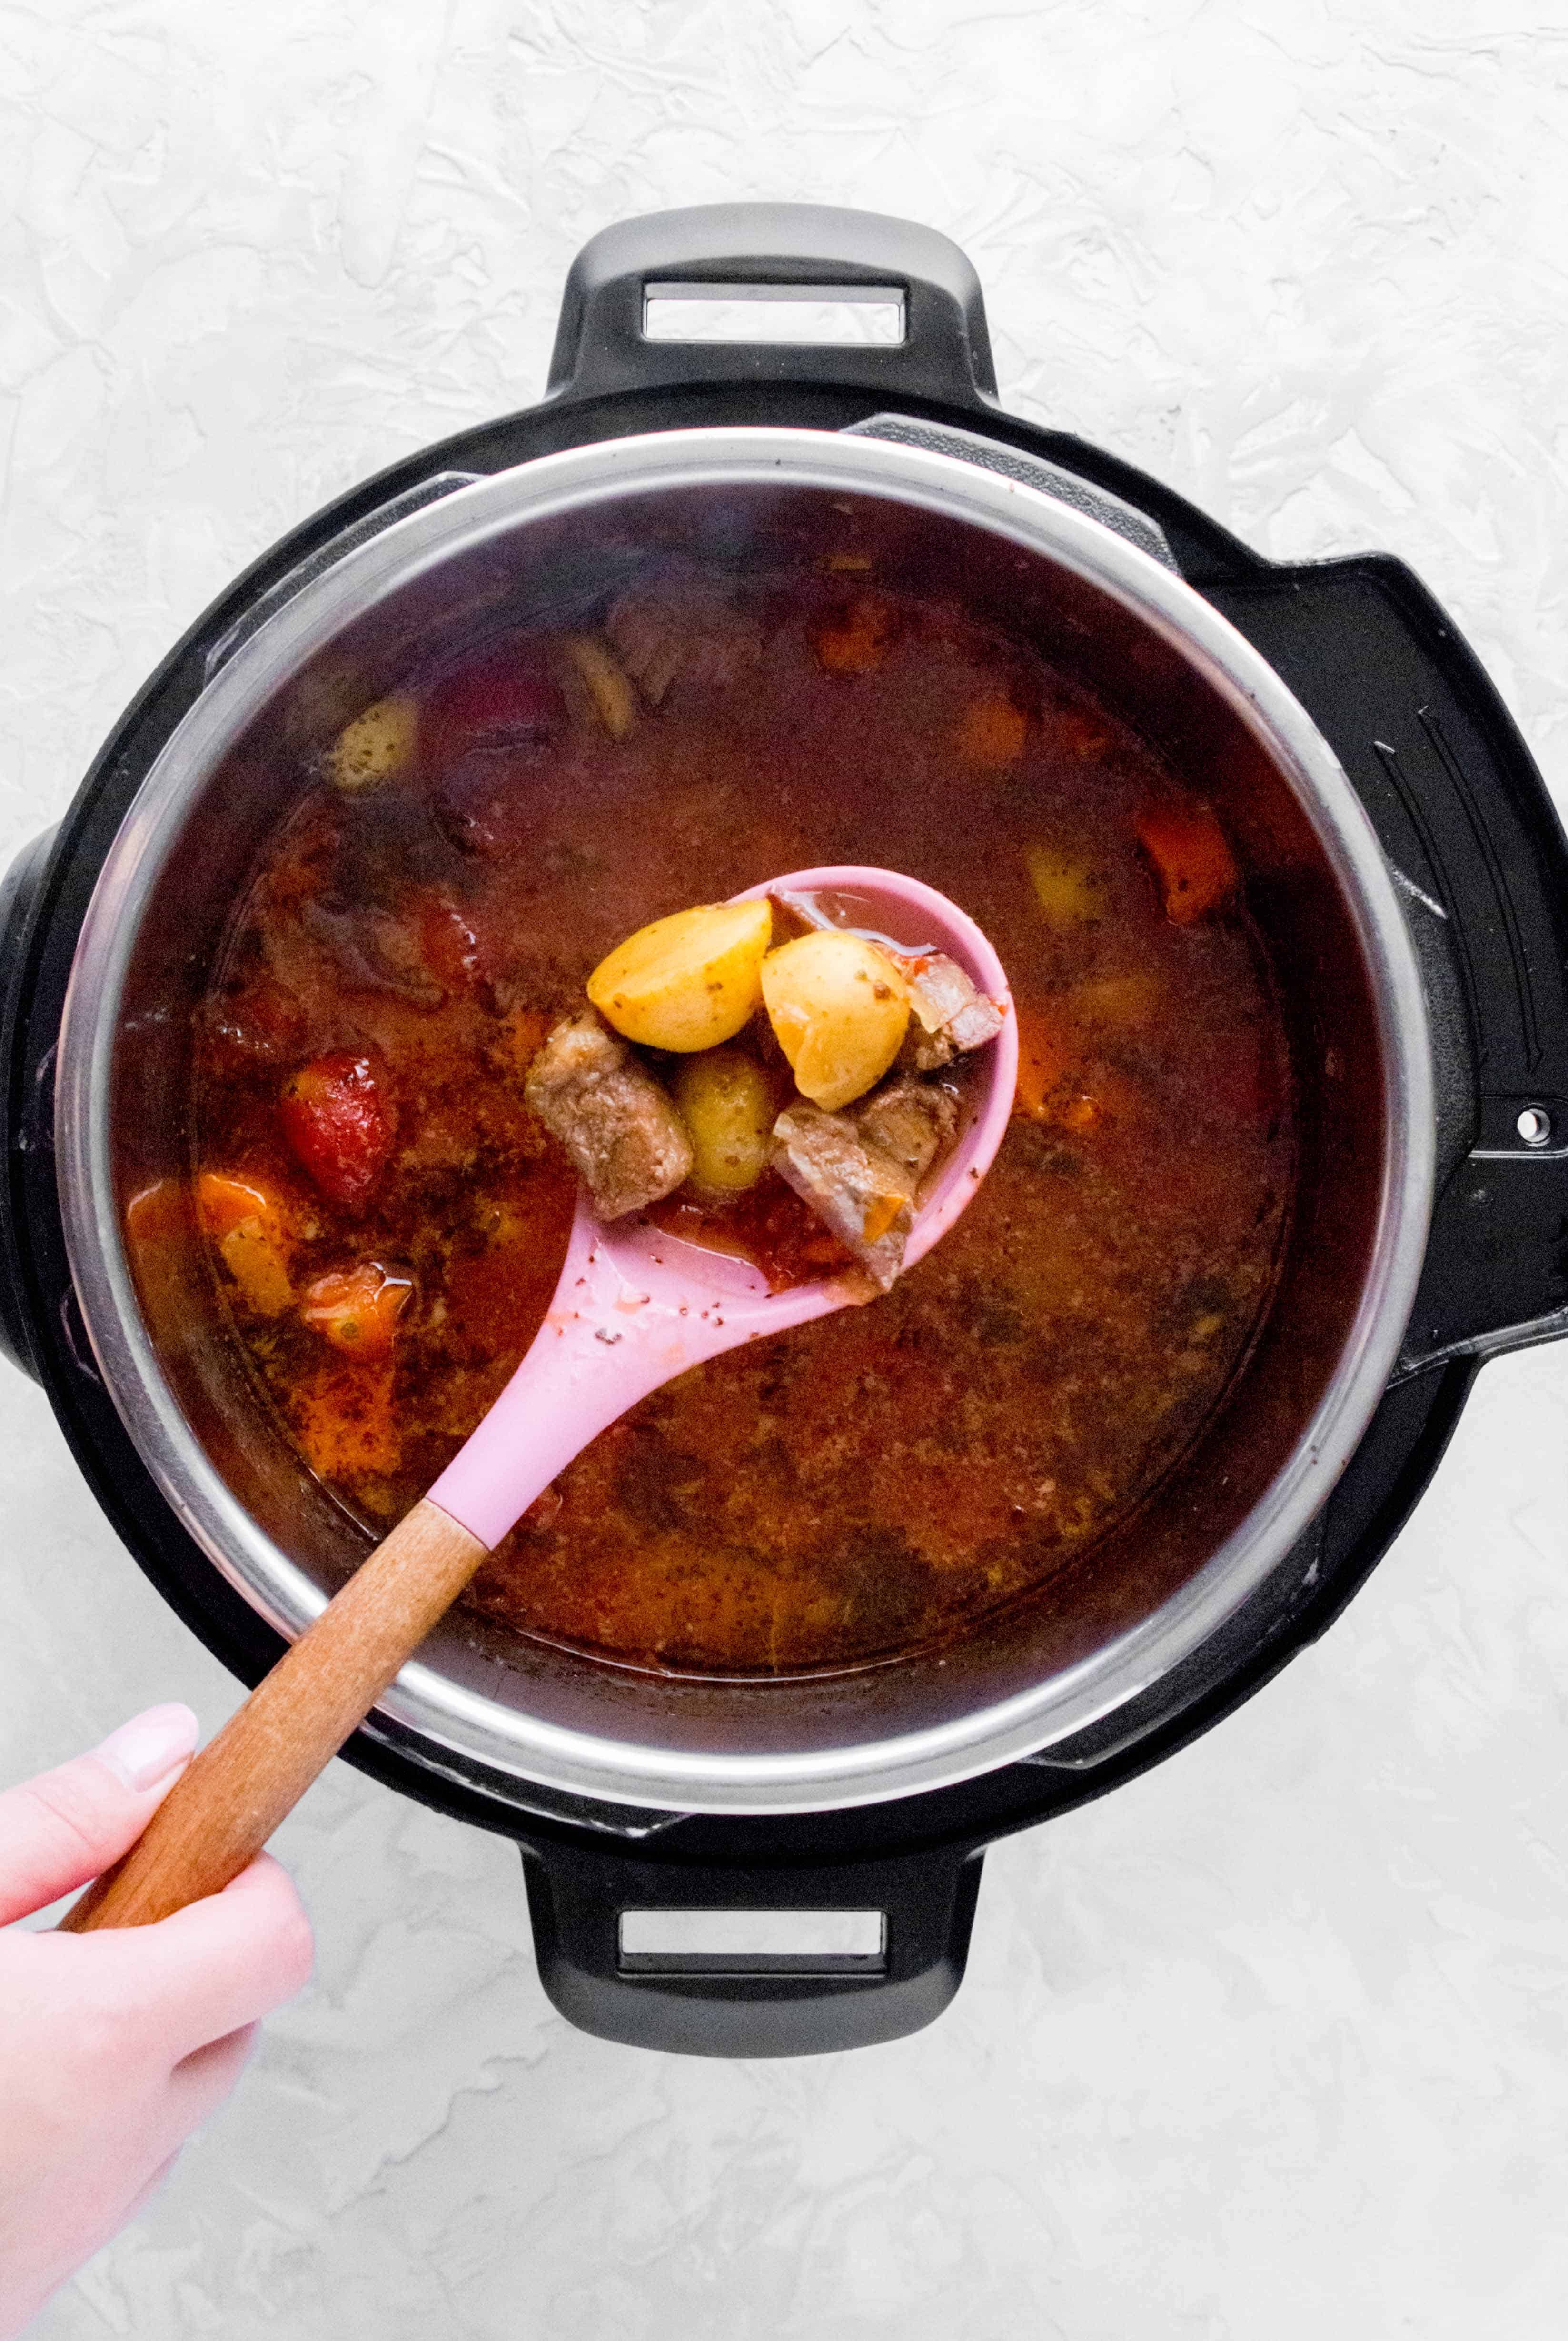 This classic hearty Beef and Tomato Soup warms you up inside out. A childhood favourite, this beef and tomato stew can be made with the Instant Pot, slow cooker, or on the stove top!